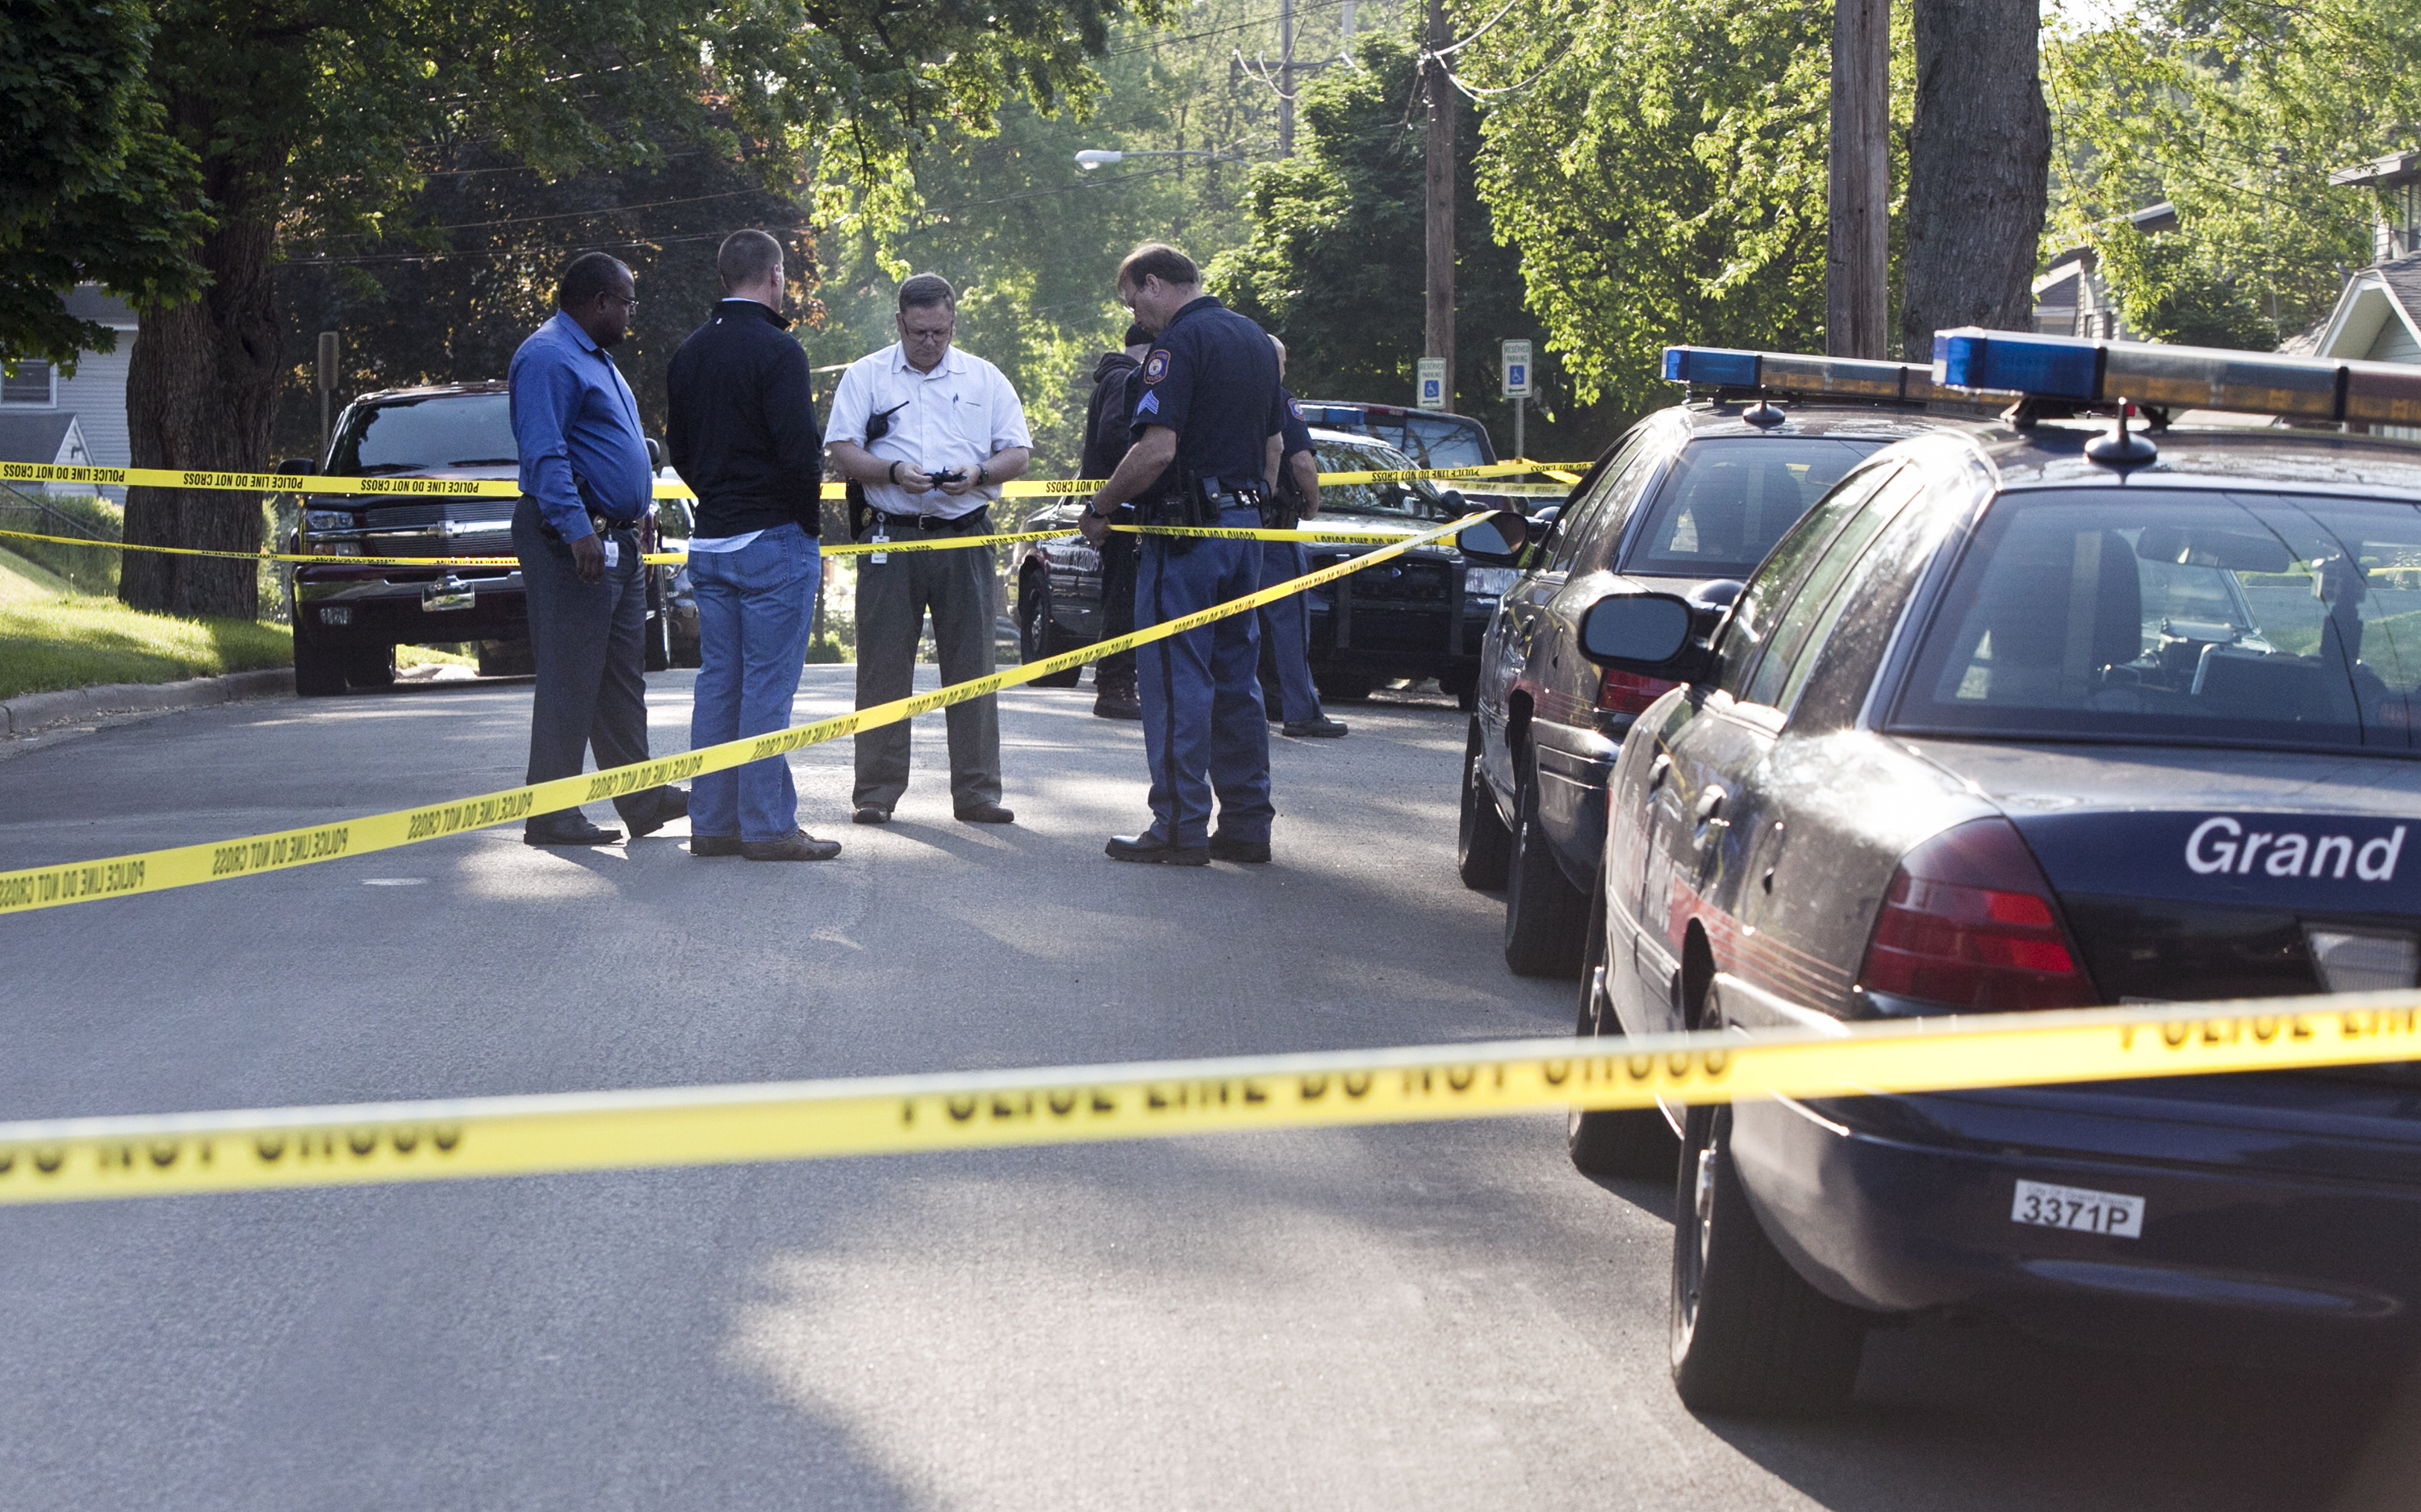 Police investigate the scene of a shooting, on May 28, 2015 in Grand Rapids, Mich. As people across the country call for more investment in inner-city communities, activists in Grand Rapids are turning to crowdsourcing to help them fund anti-violence initiatives. (Cory Morse—Grand Rapids Press/AP)